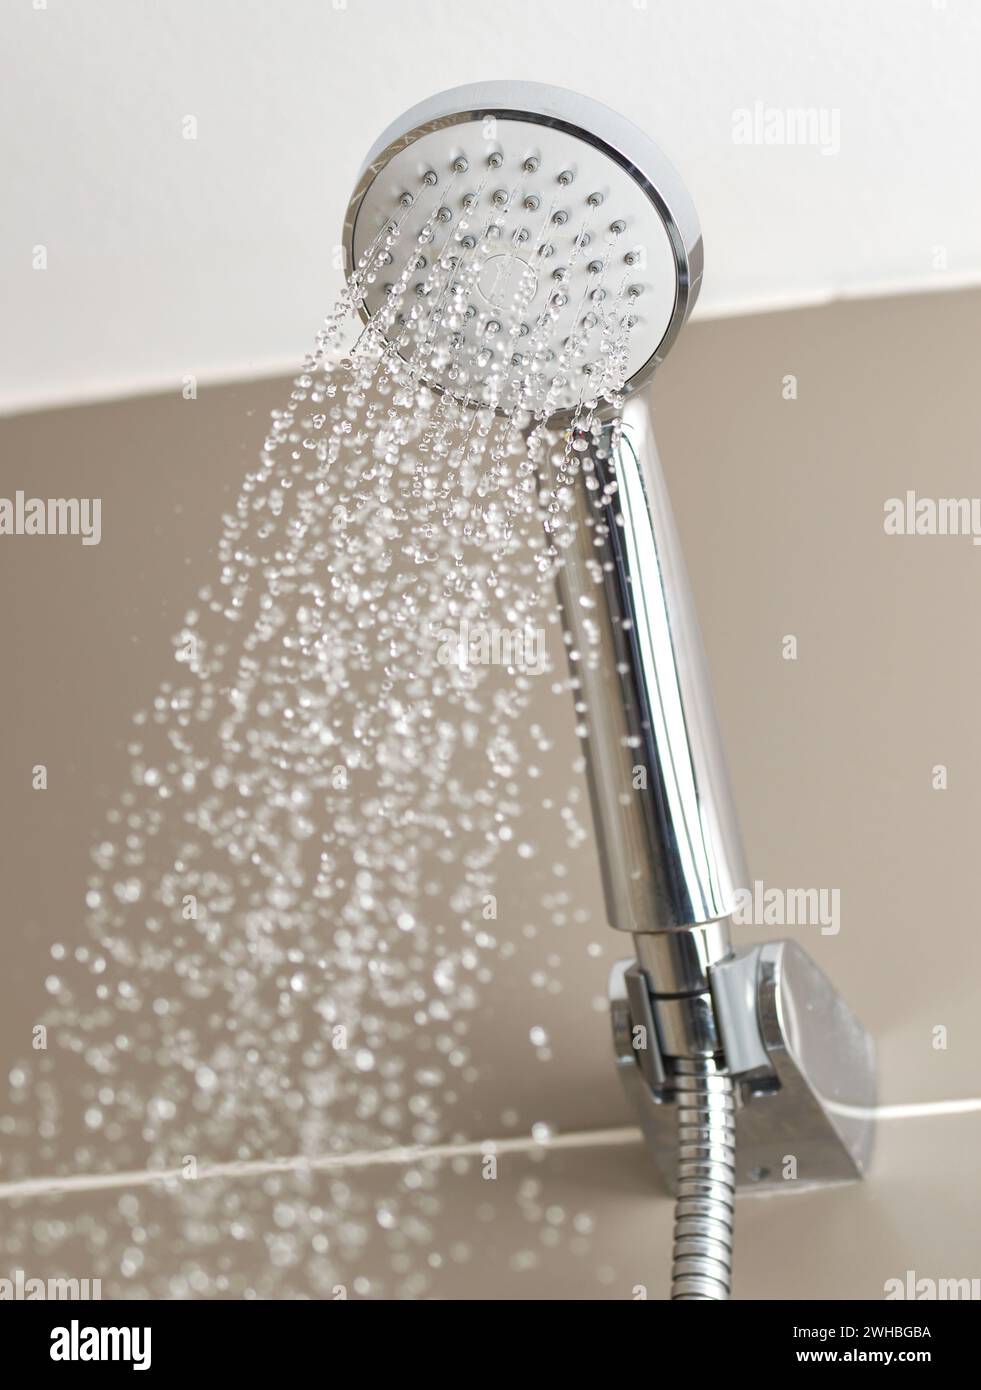 Close up of shower head flowing water Stock Photo